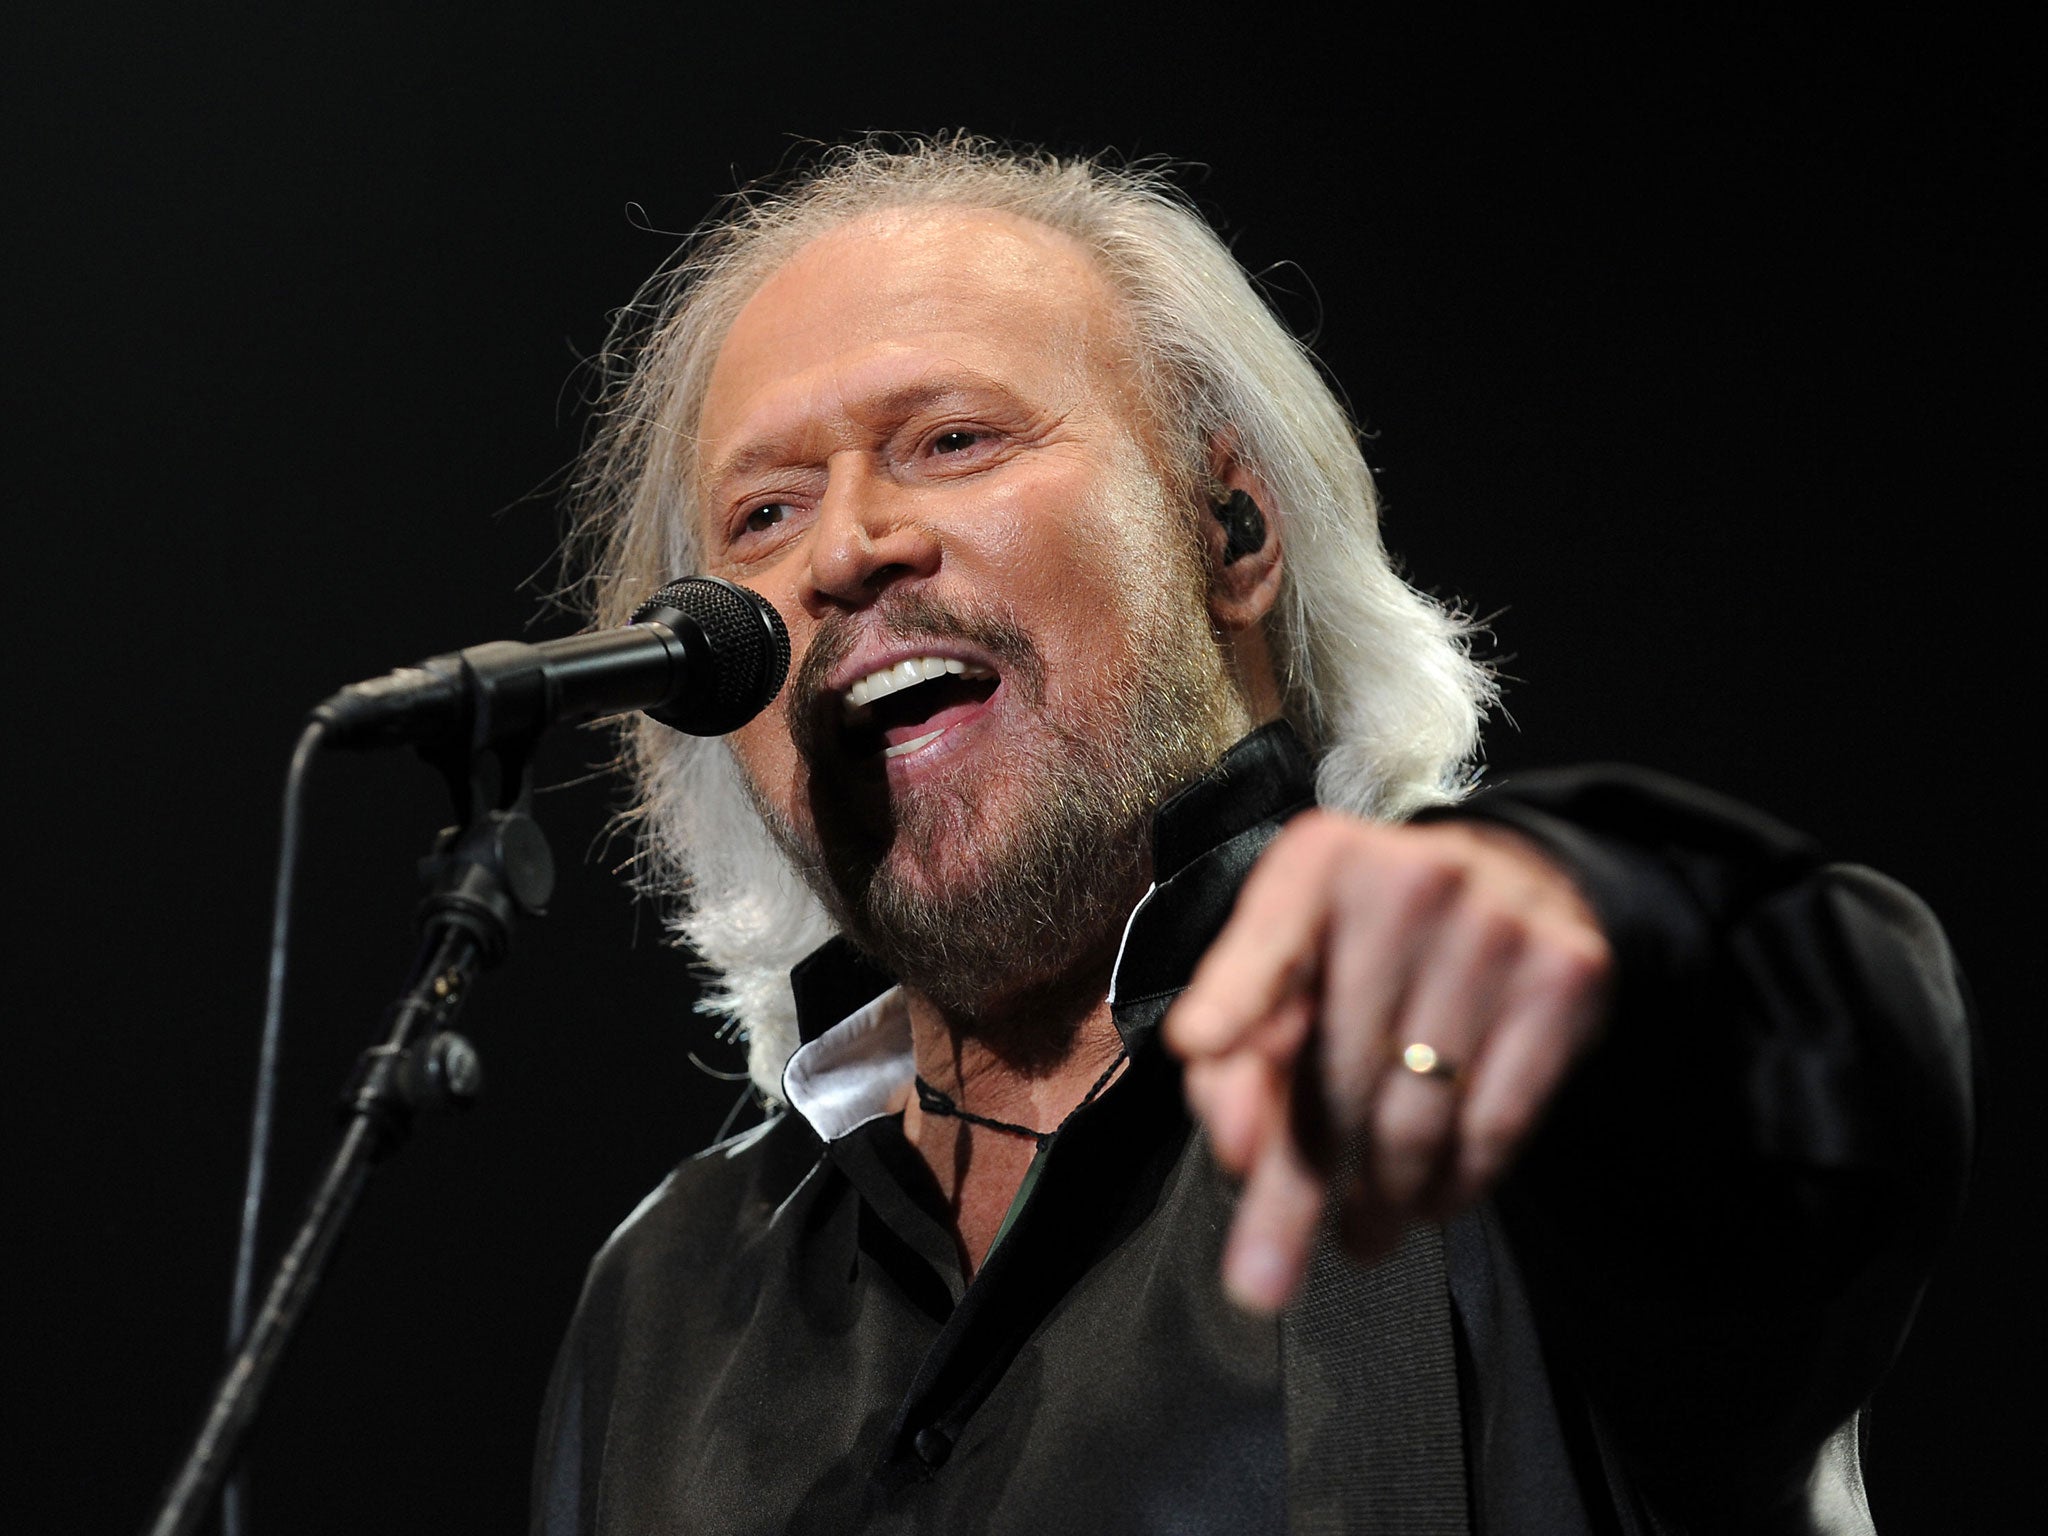 Barry Gibb hopes to die on stage while singing ‘Stayin Alive’ The